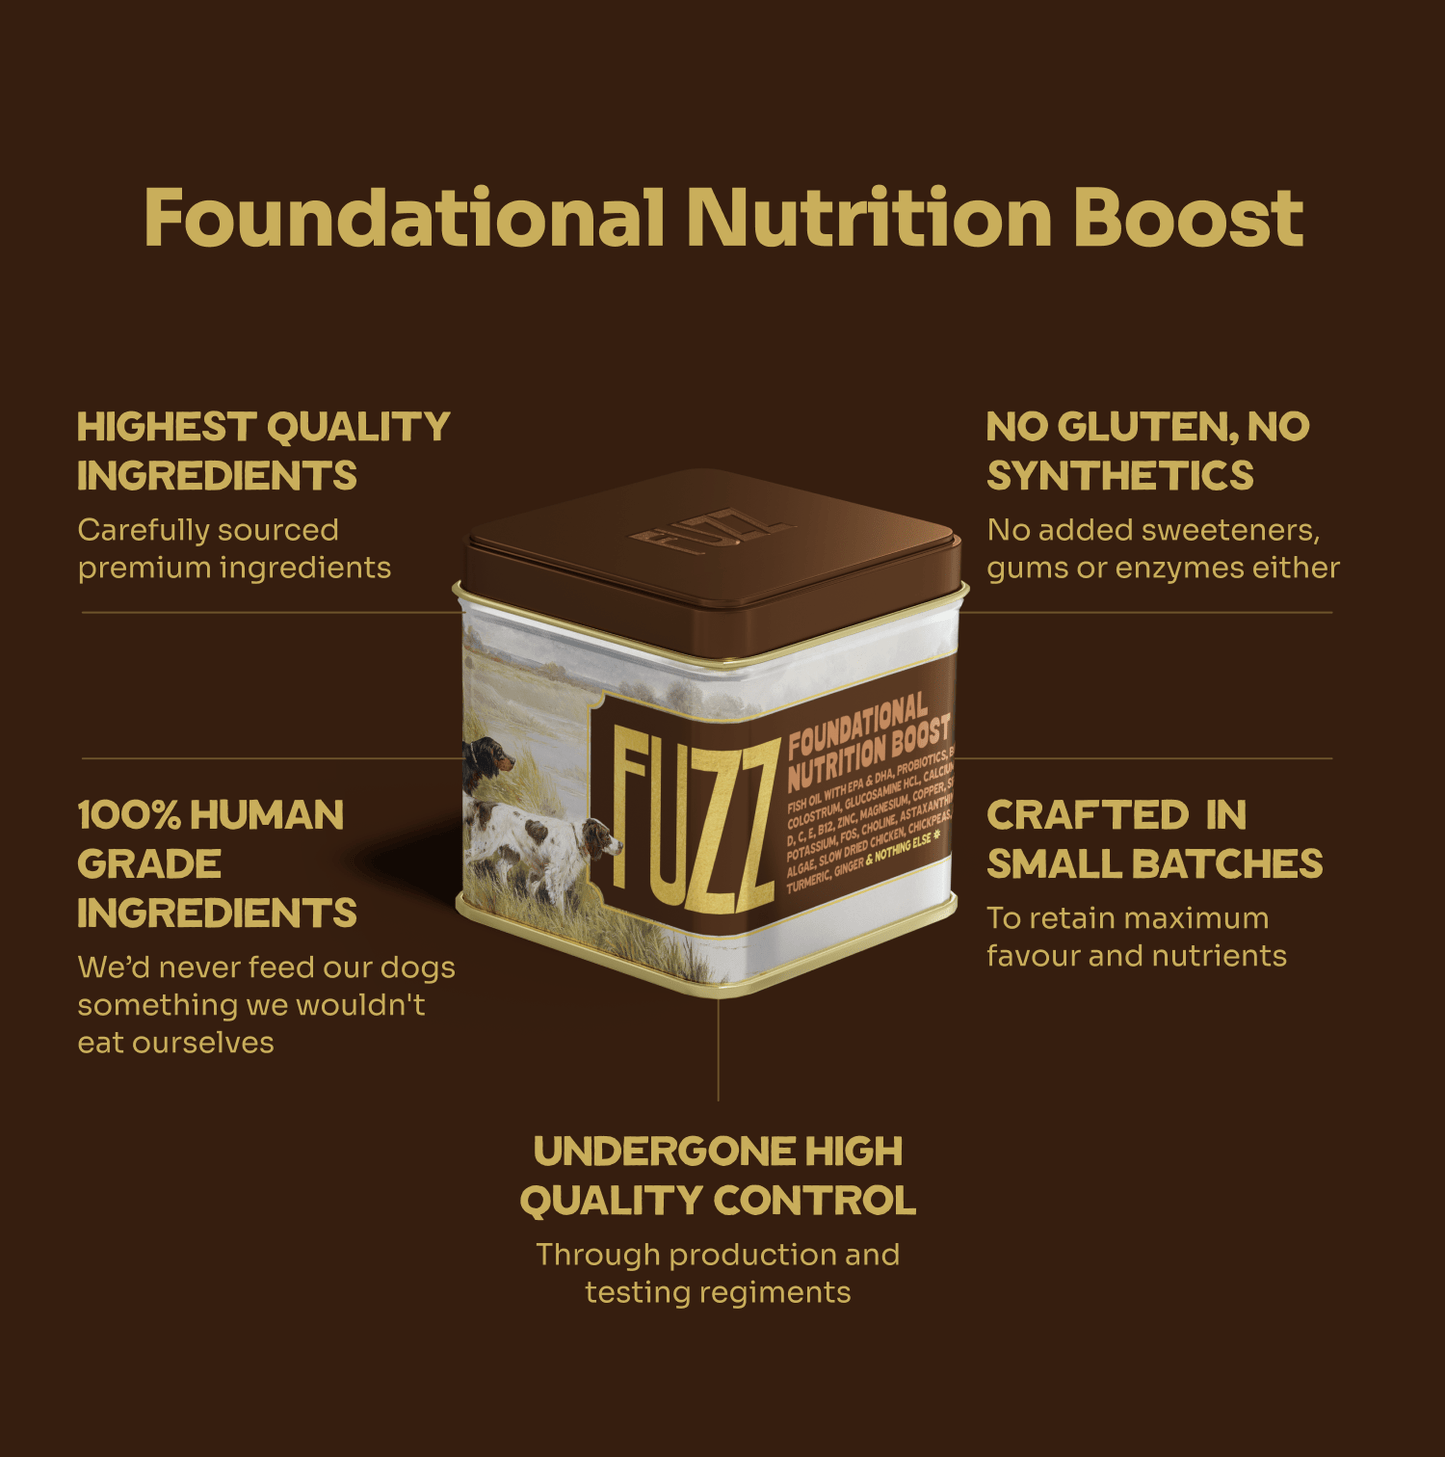 Foundational Nutrition Boost